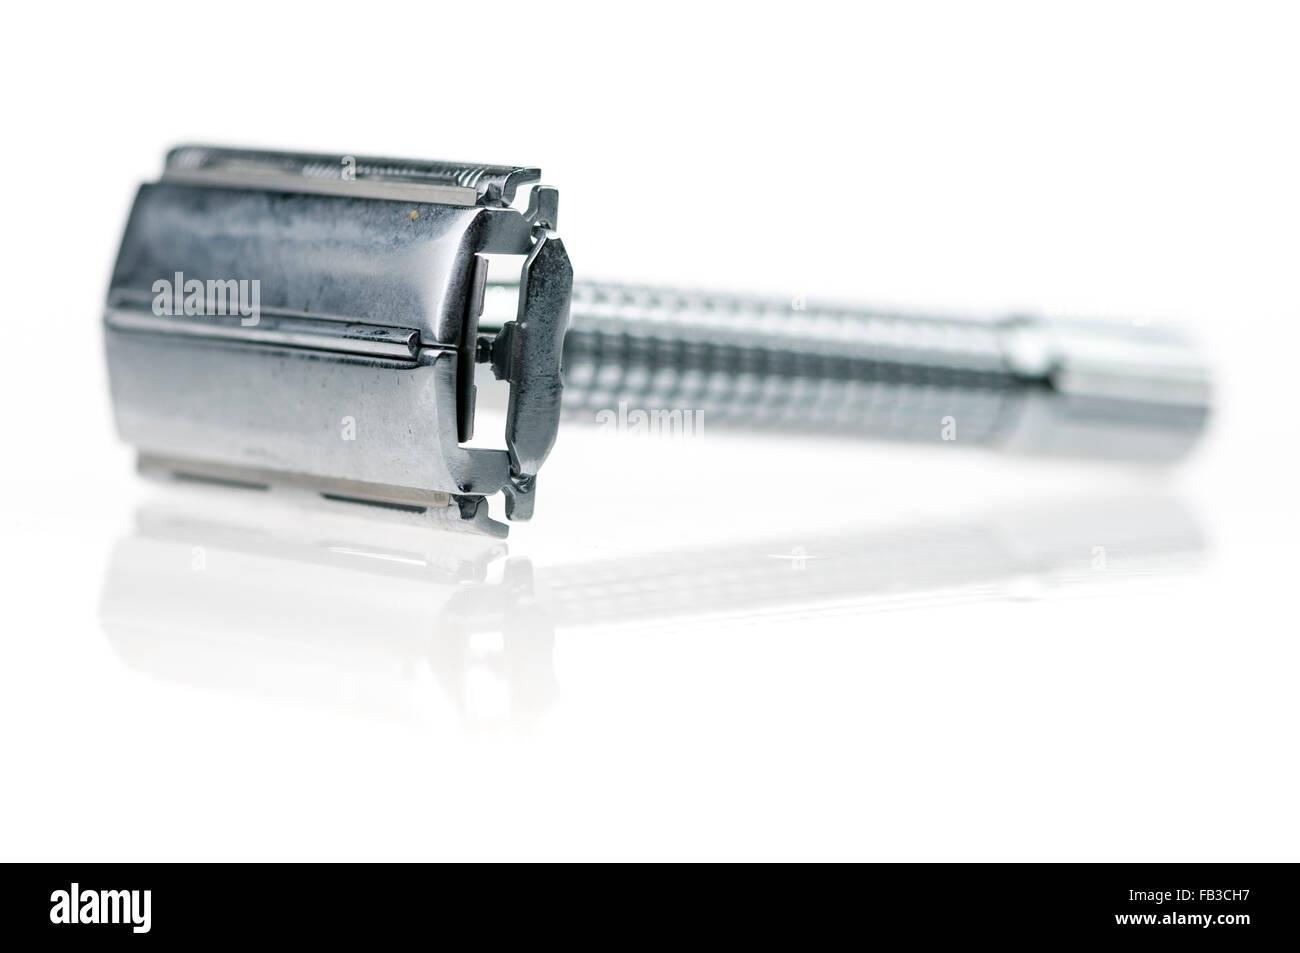 Old fashioned stainless steel safety razor. Stock Photo